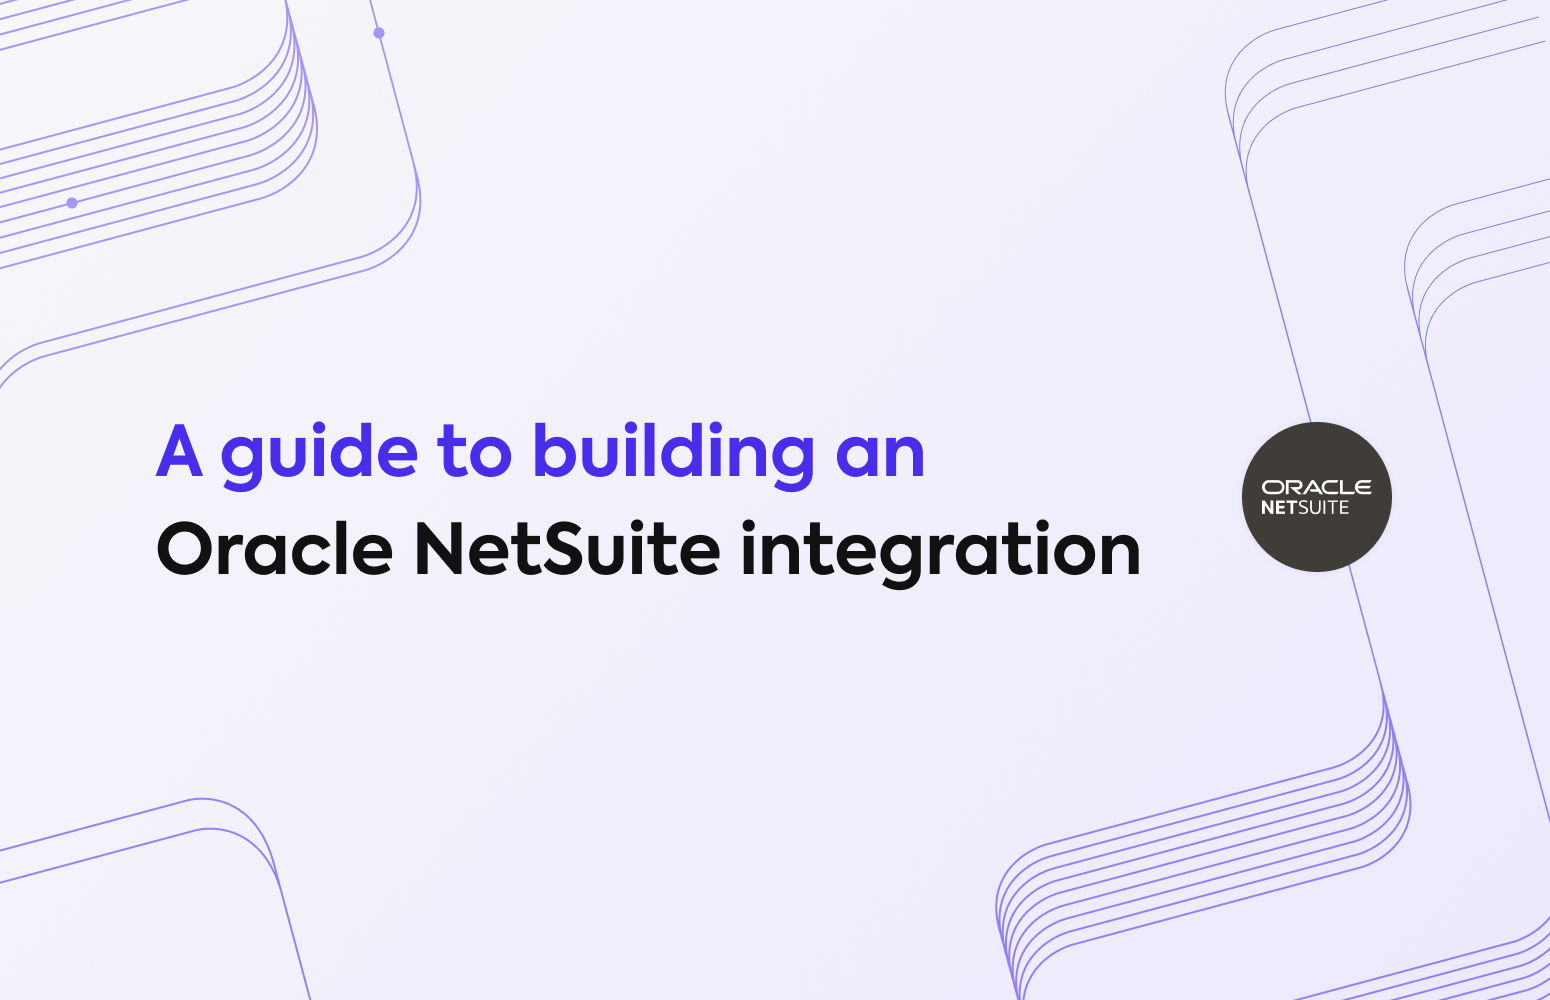 A guide to building an Oracle NetSuite integration